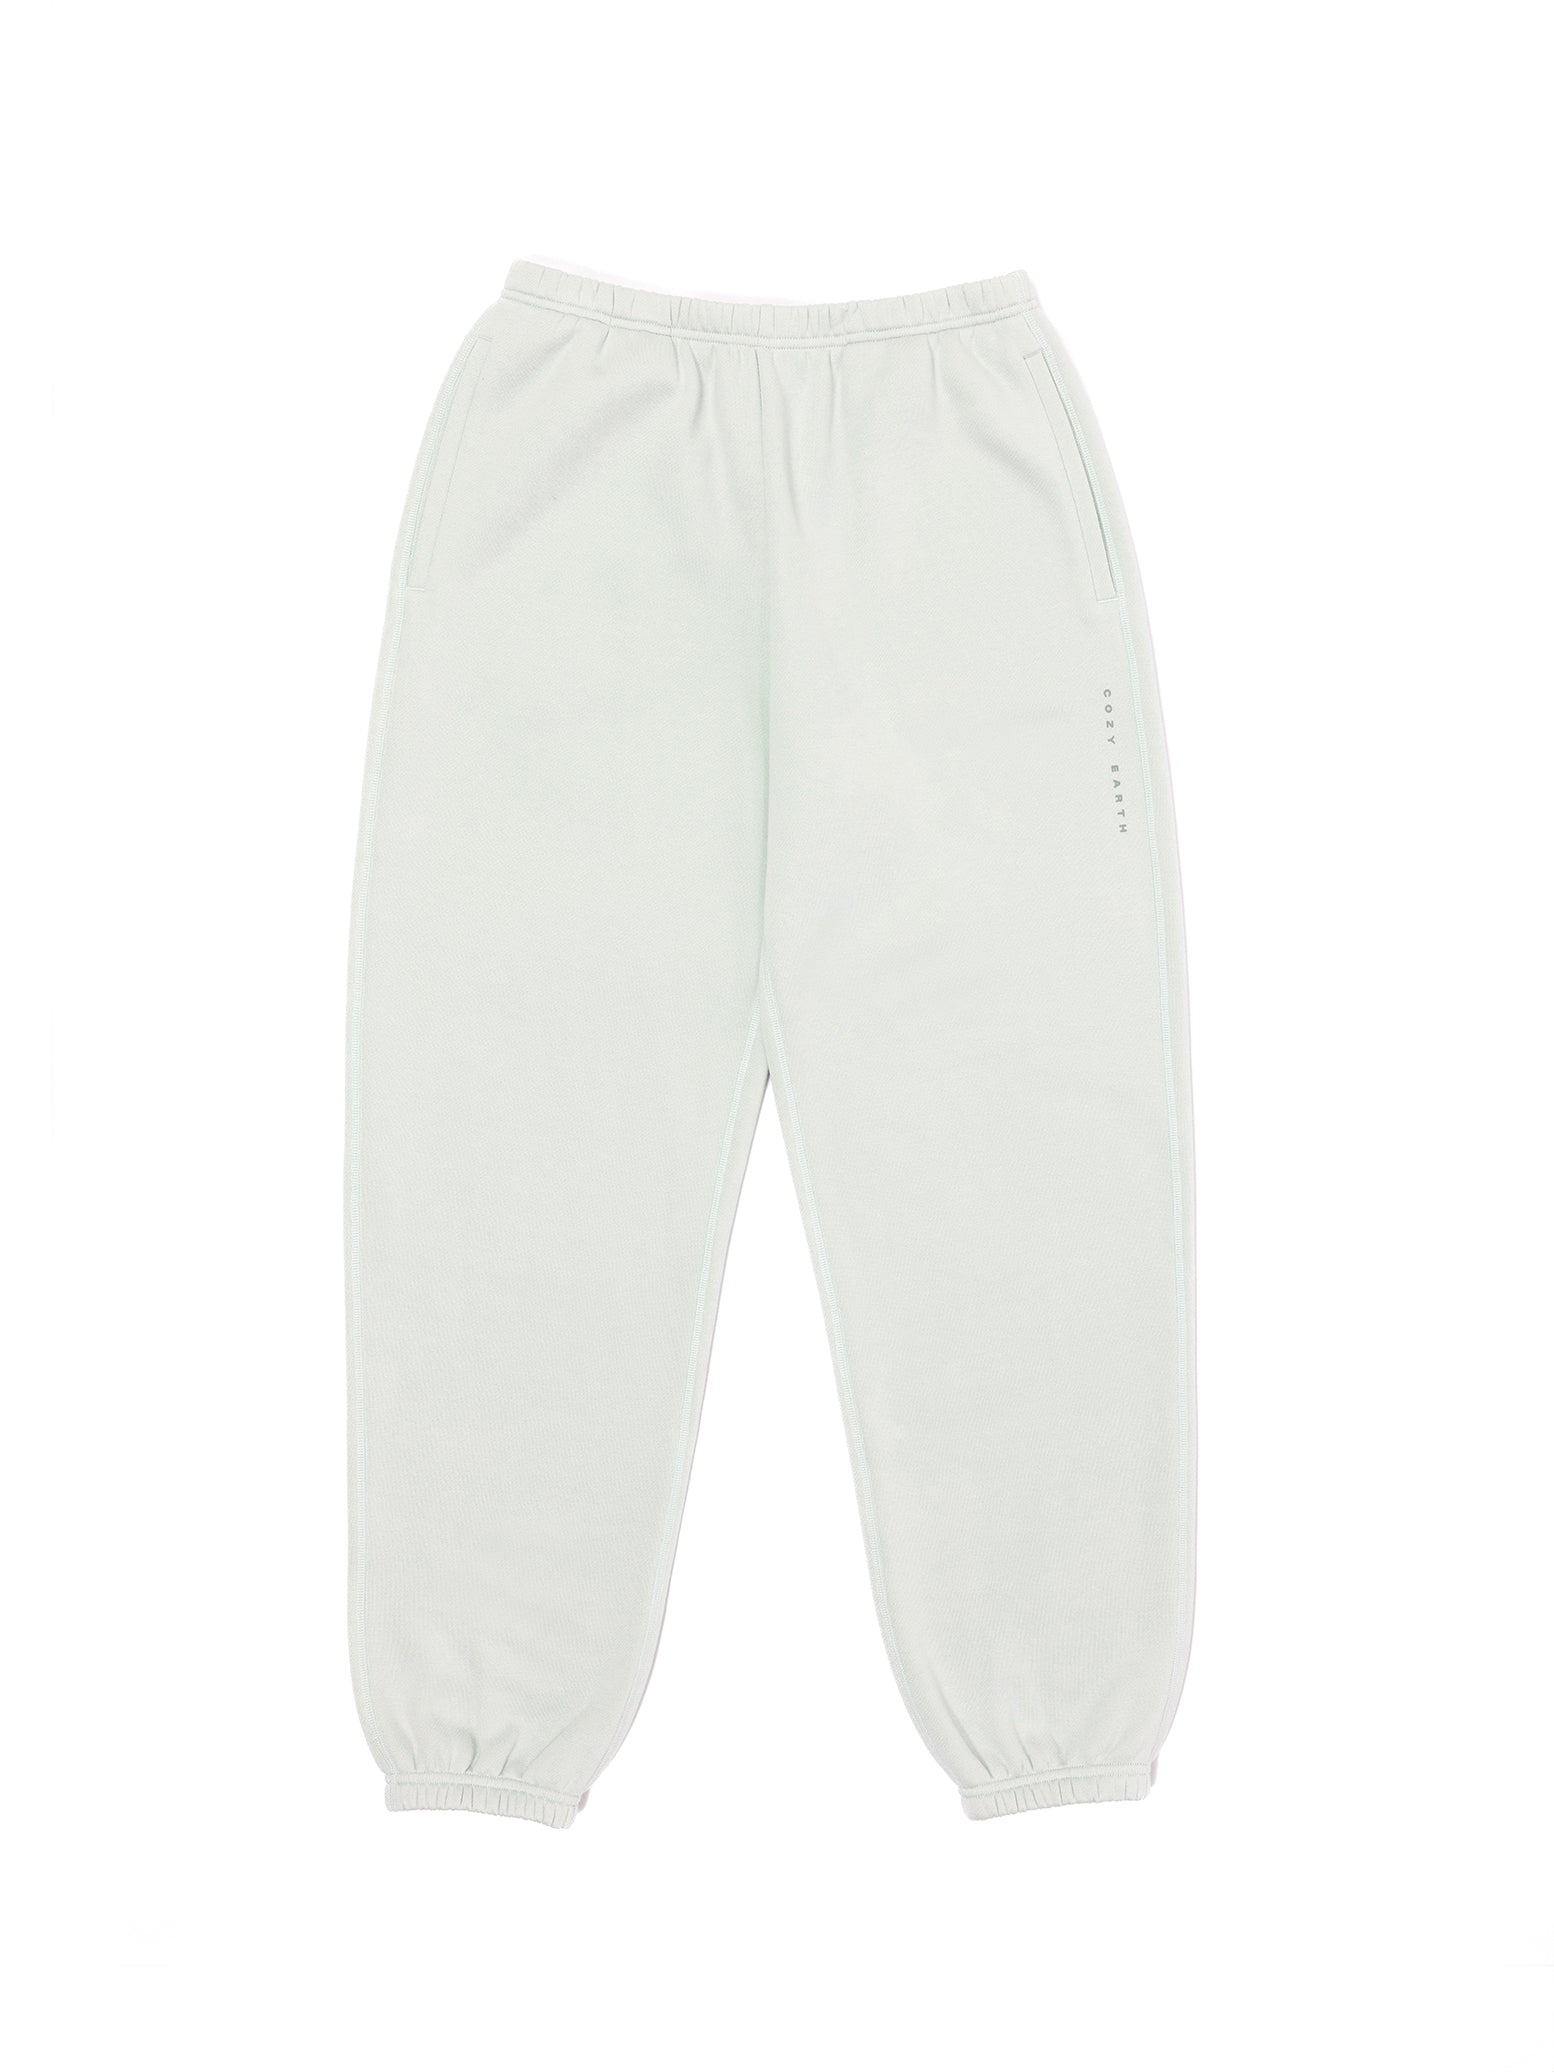 Arctic CityScape Joggers. The Joggers are laying flat over a white background. 